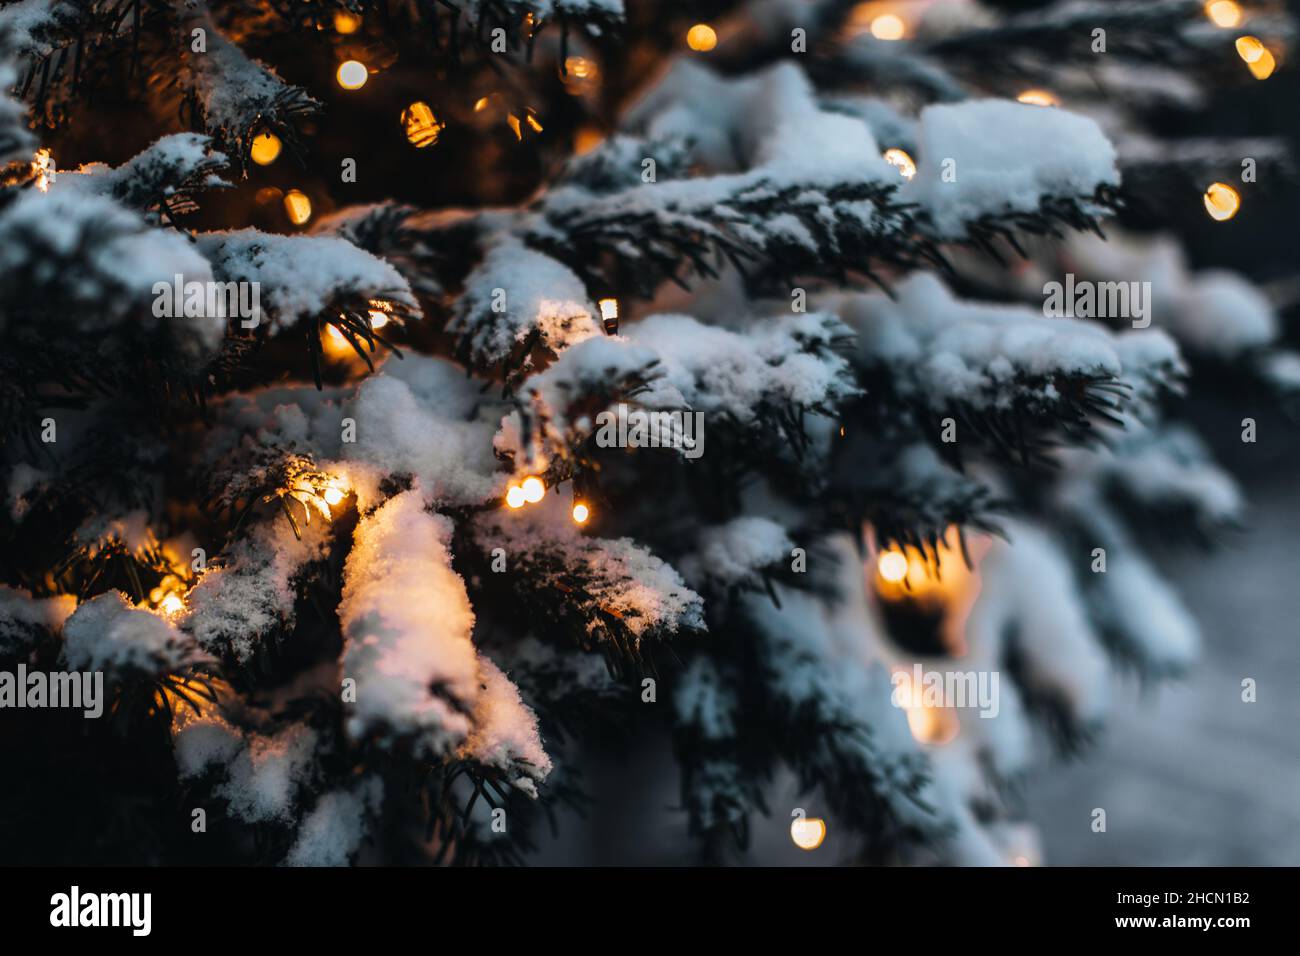 Fir branches covered with white fluffy snow and golden twinkling garland in the winter season. Beauty in the nature. Golden garland light. Outdoor dec Stock Photo